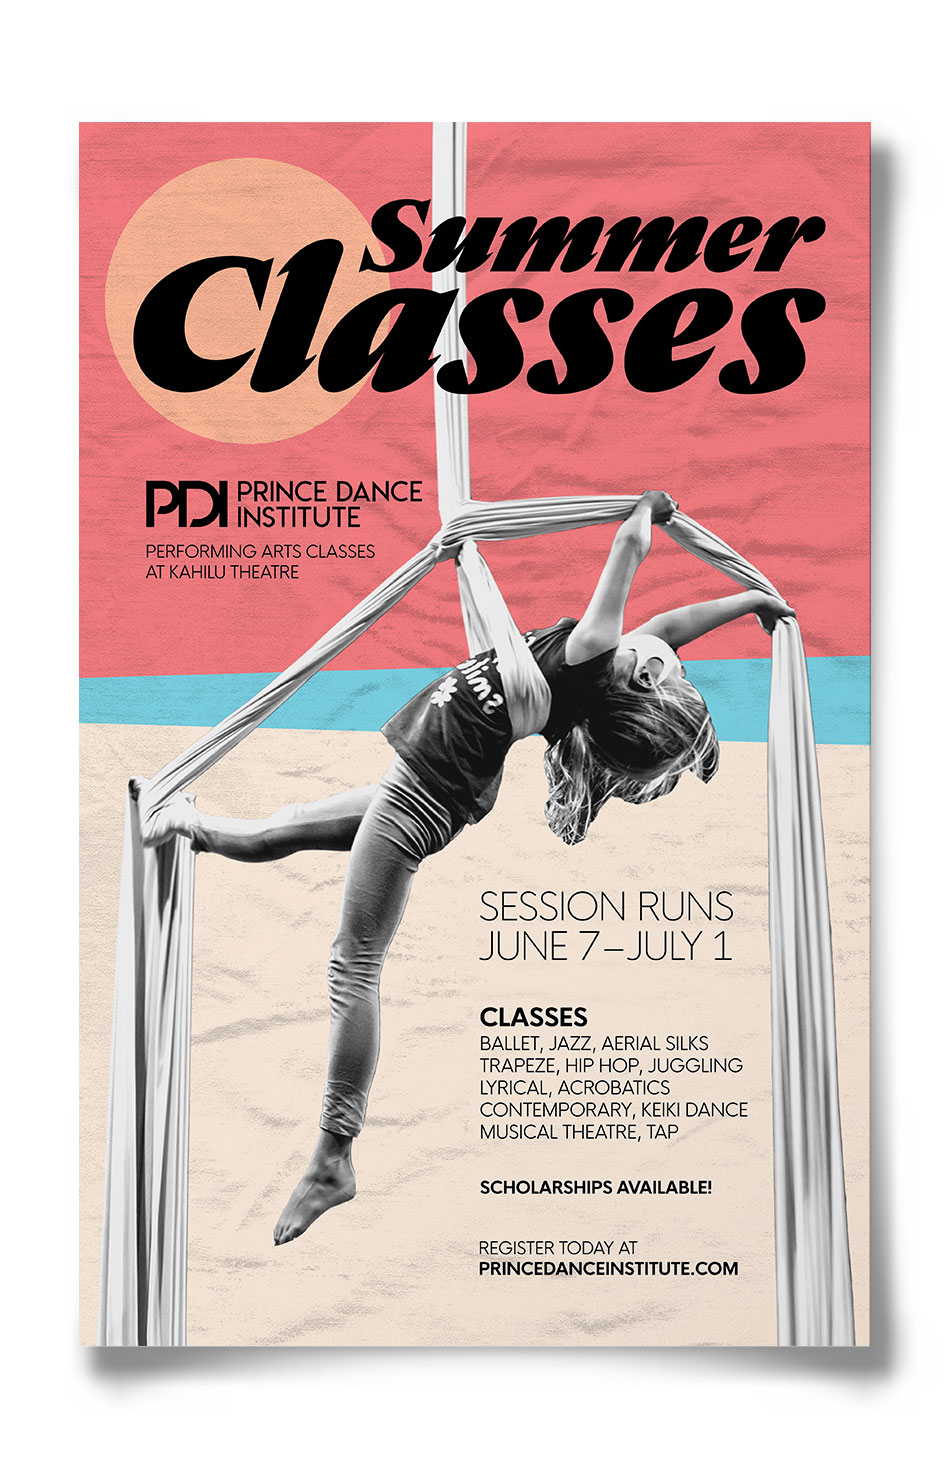 Poster for Prince Dance Institute's 2021 Summer Classes